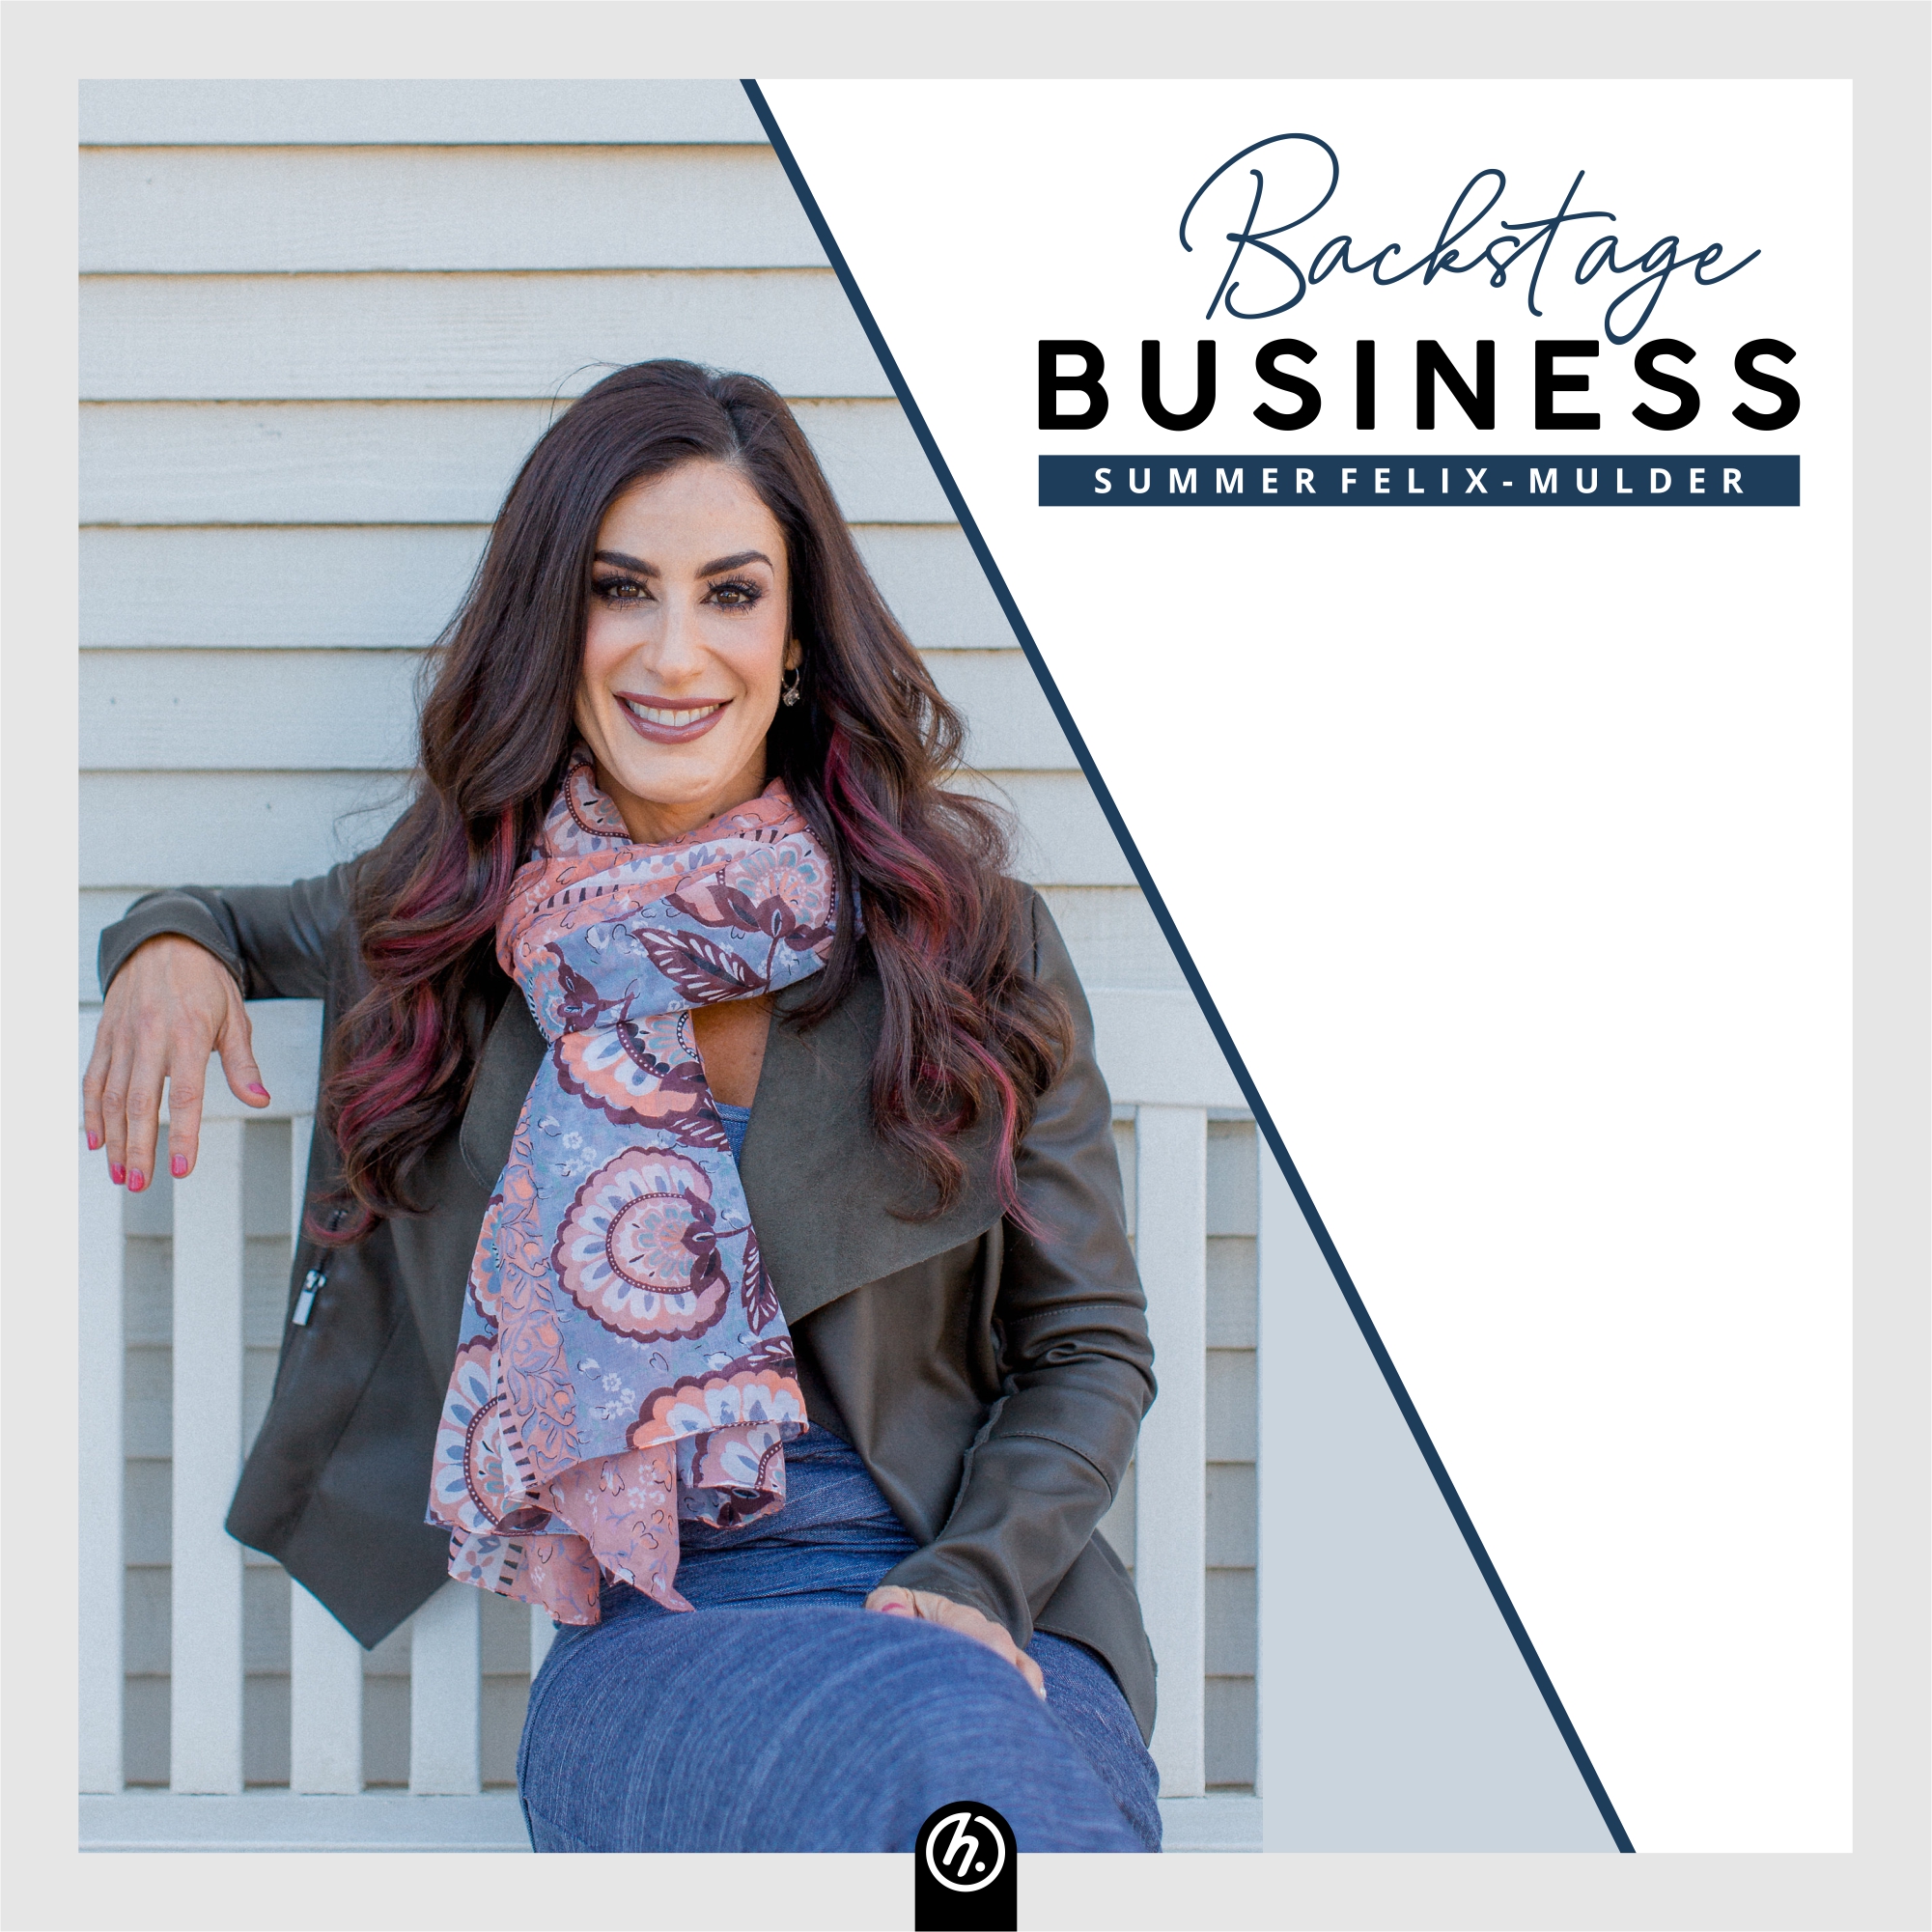 Turning Tough Times Into Opportunity with Randy Garn - Backstage Business #37